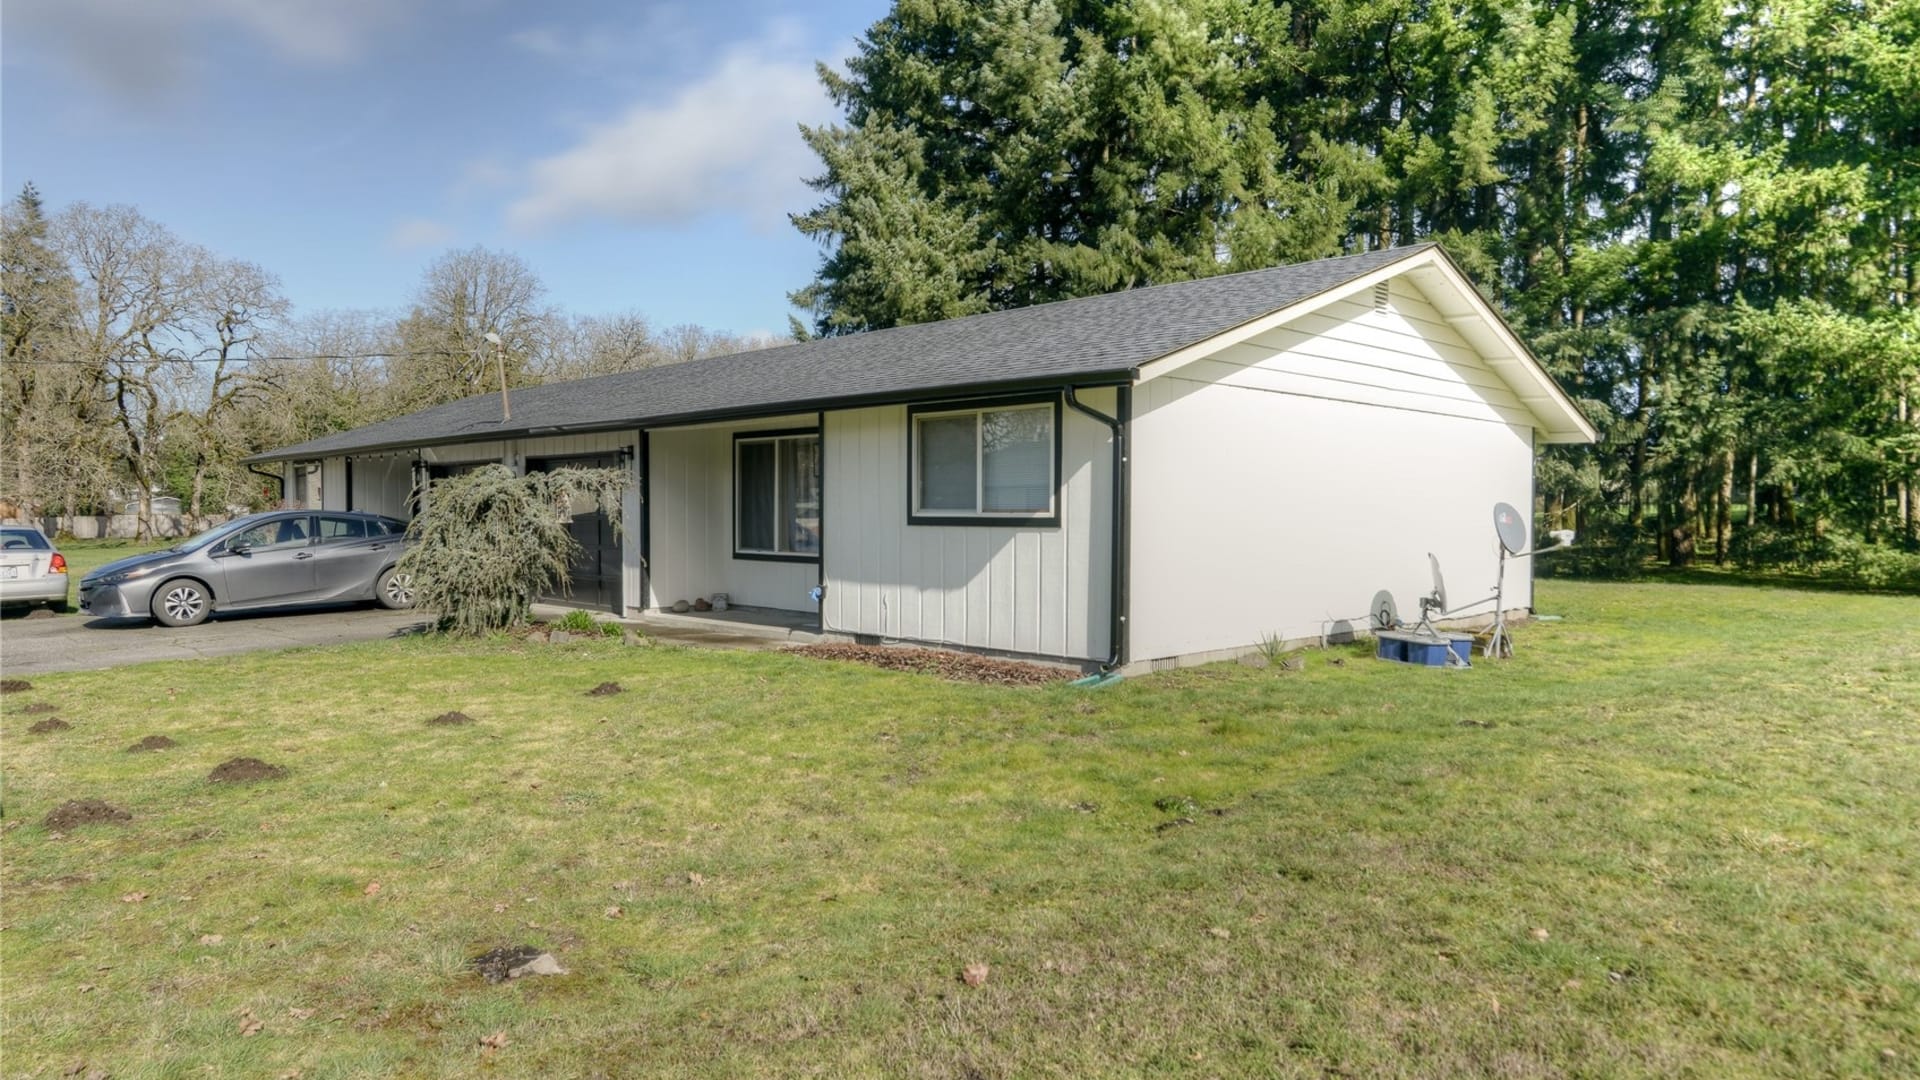 18404 18402 Albany Street SW #A-D, Rochester, WA 98579